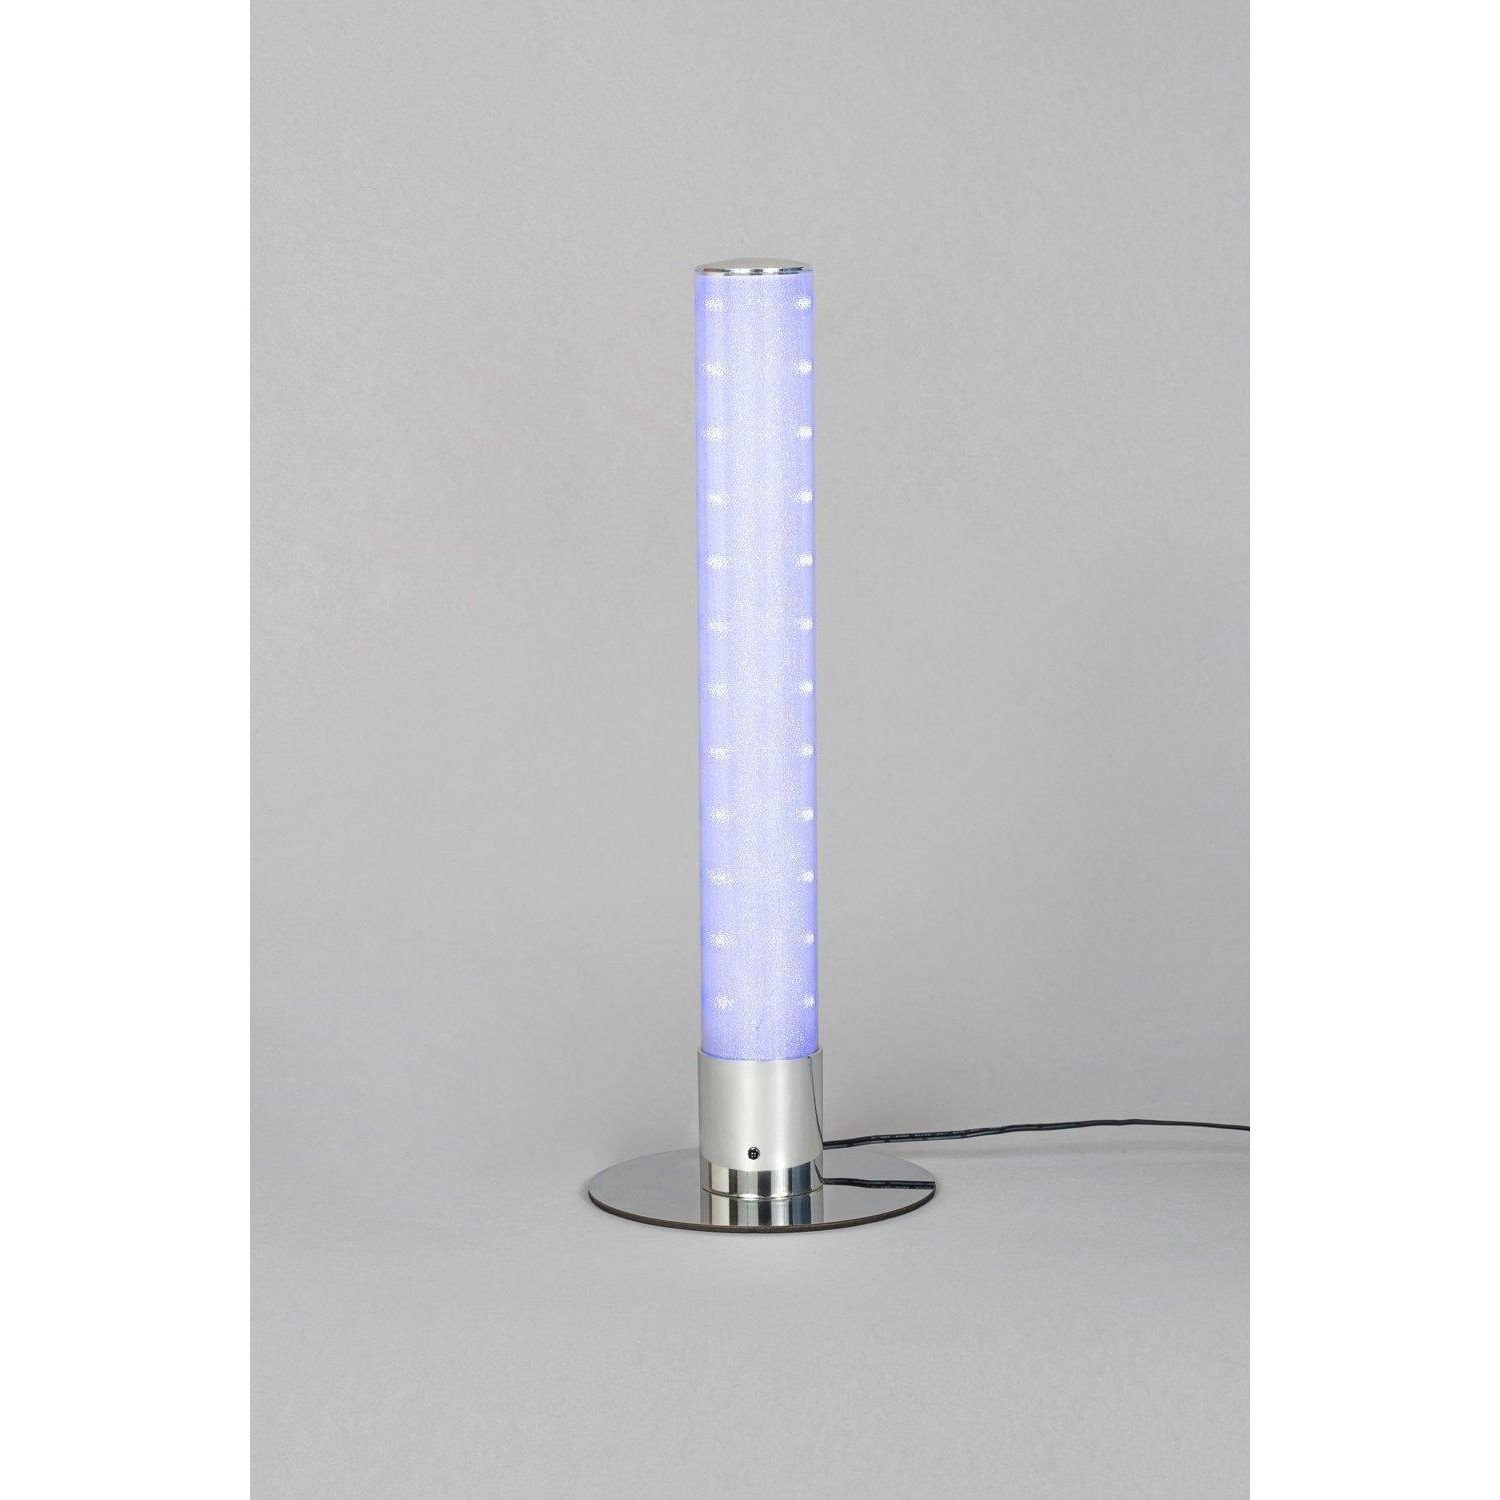 Glow Shimmer Table Lamp - image 1